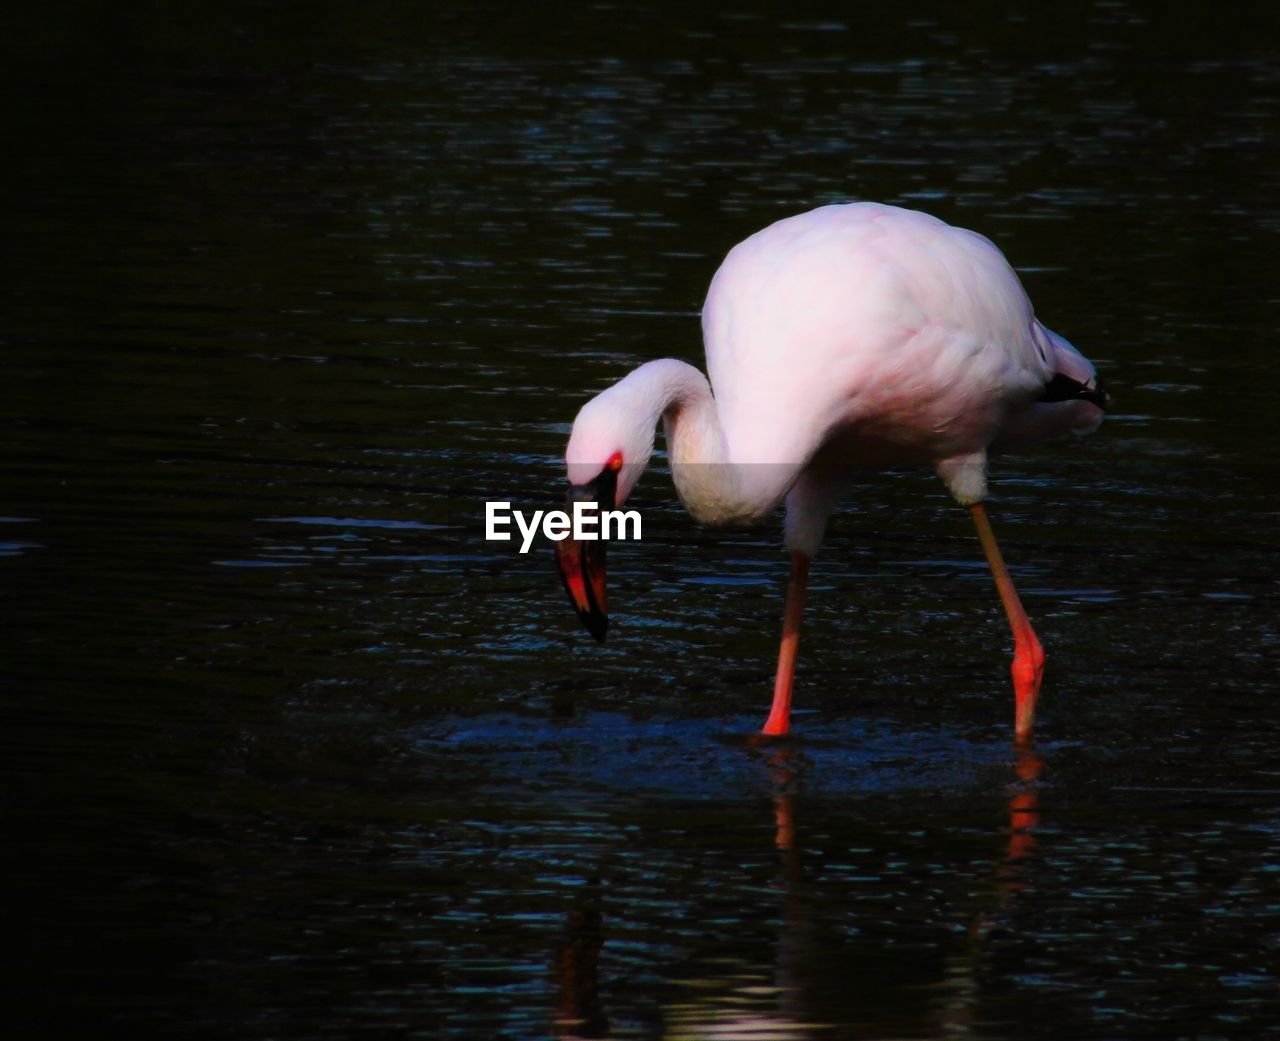 Flamingo searching for food in water